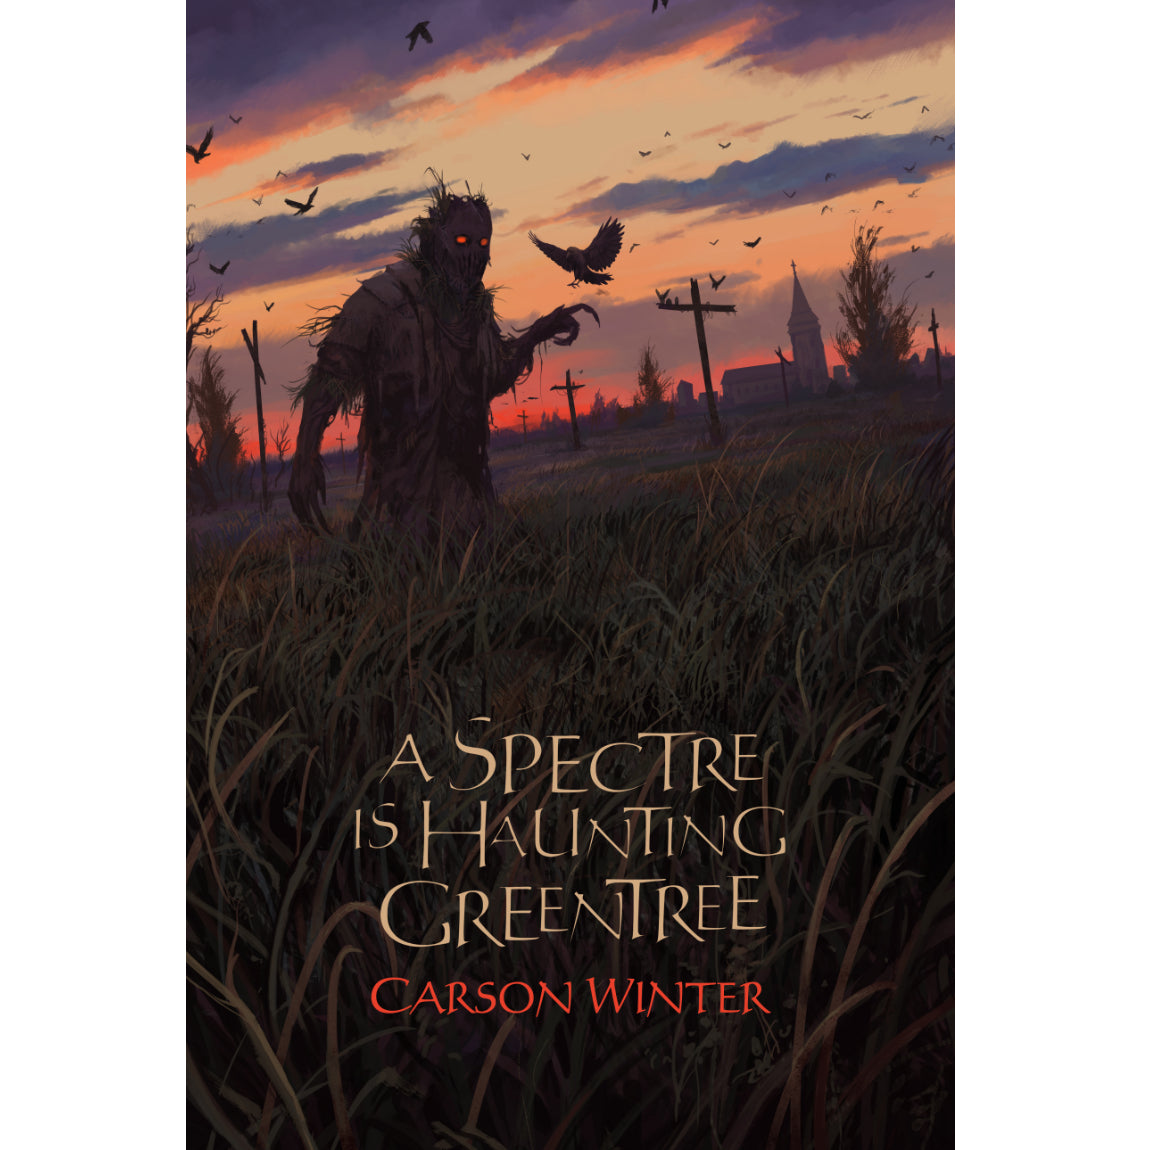 A SPECTRE IS HAUNTING GREENTREE **Preorder** - a novel by Carson Winter (softcover; includes eBook)